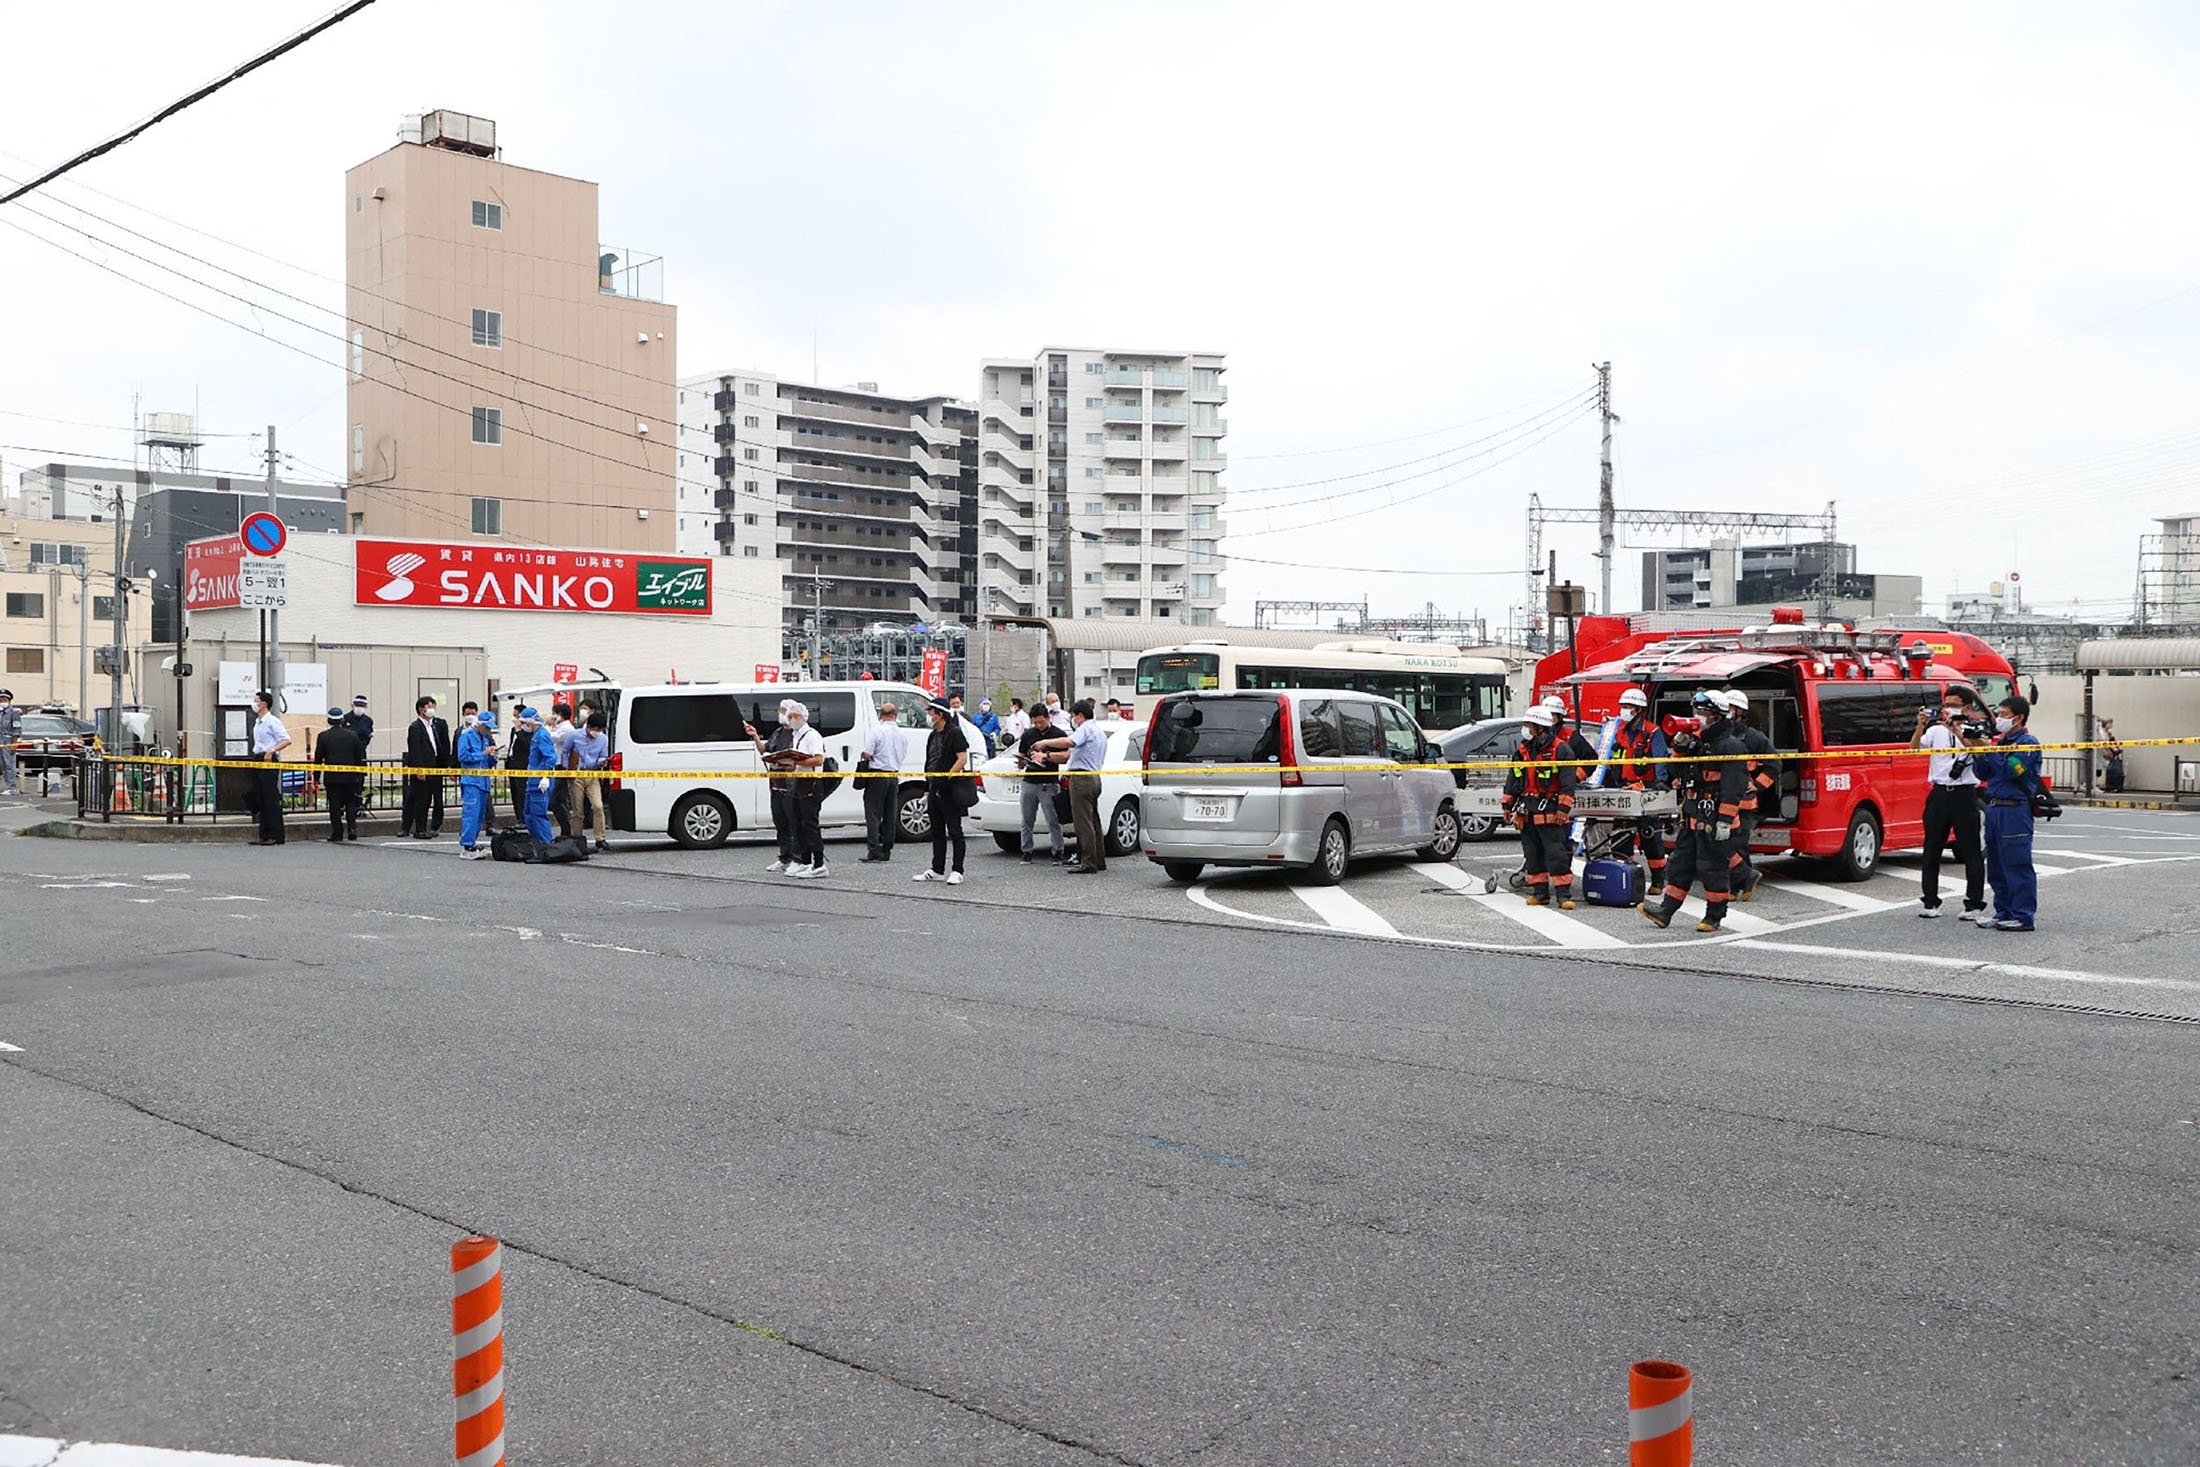 A general view shows workers at the scene after an attack on Japan's former Prime Minister Shinzo Abe at Kintetsu Yamato-Saidaiji station square in Nara, western Japan, July 8, 2022. (AFP Photo)